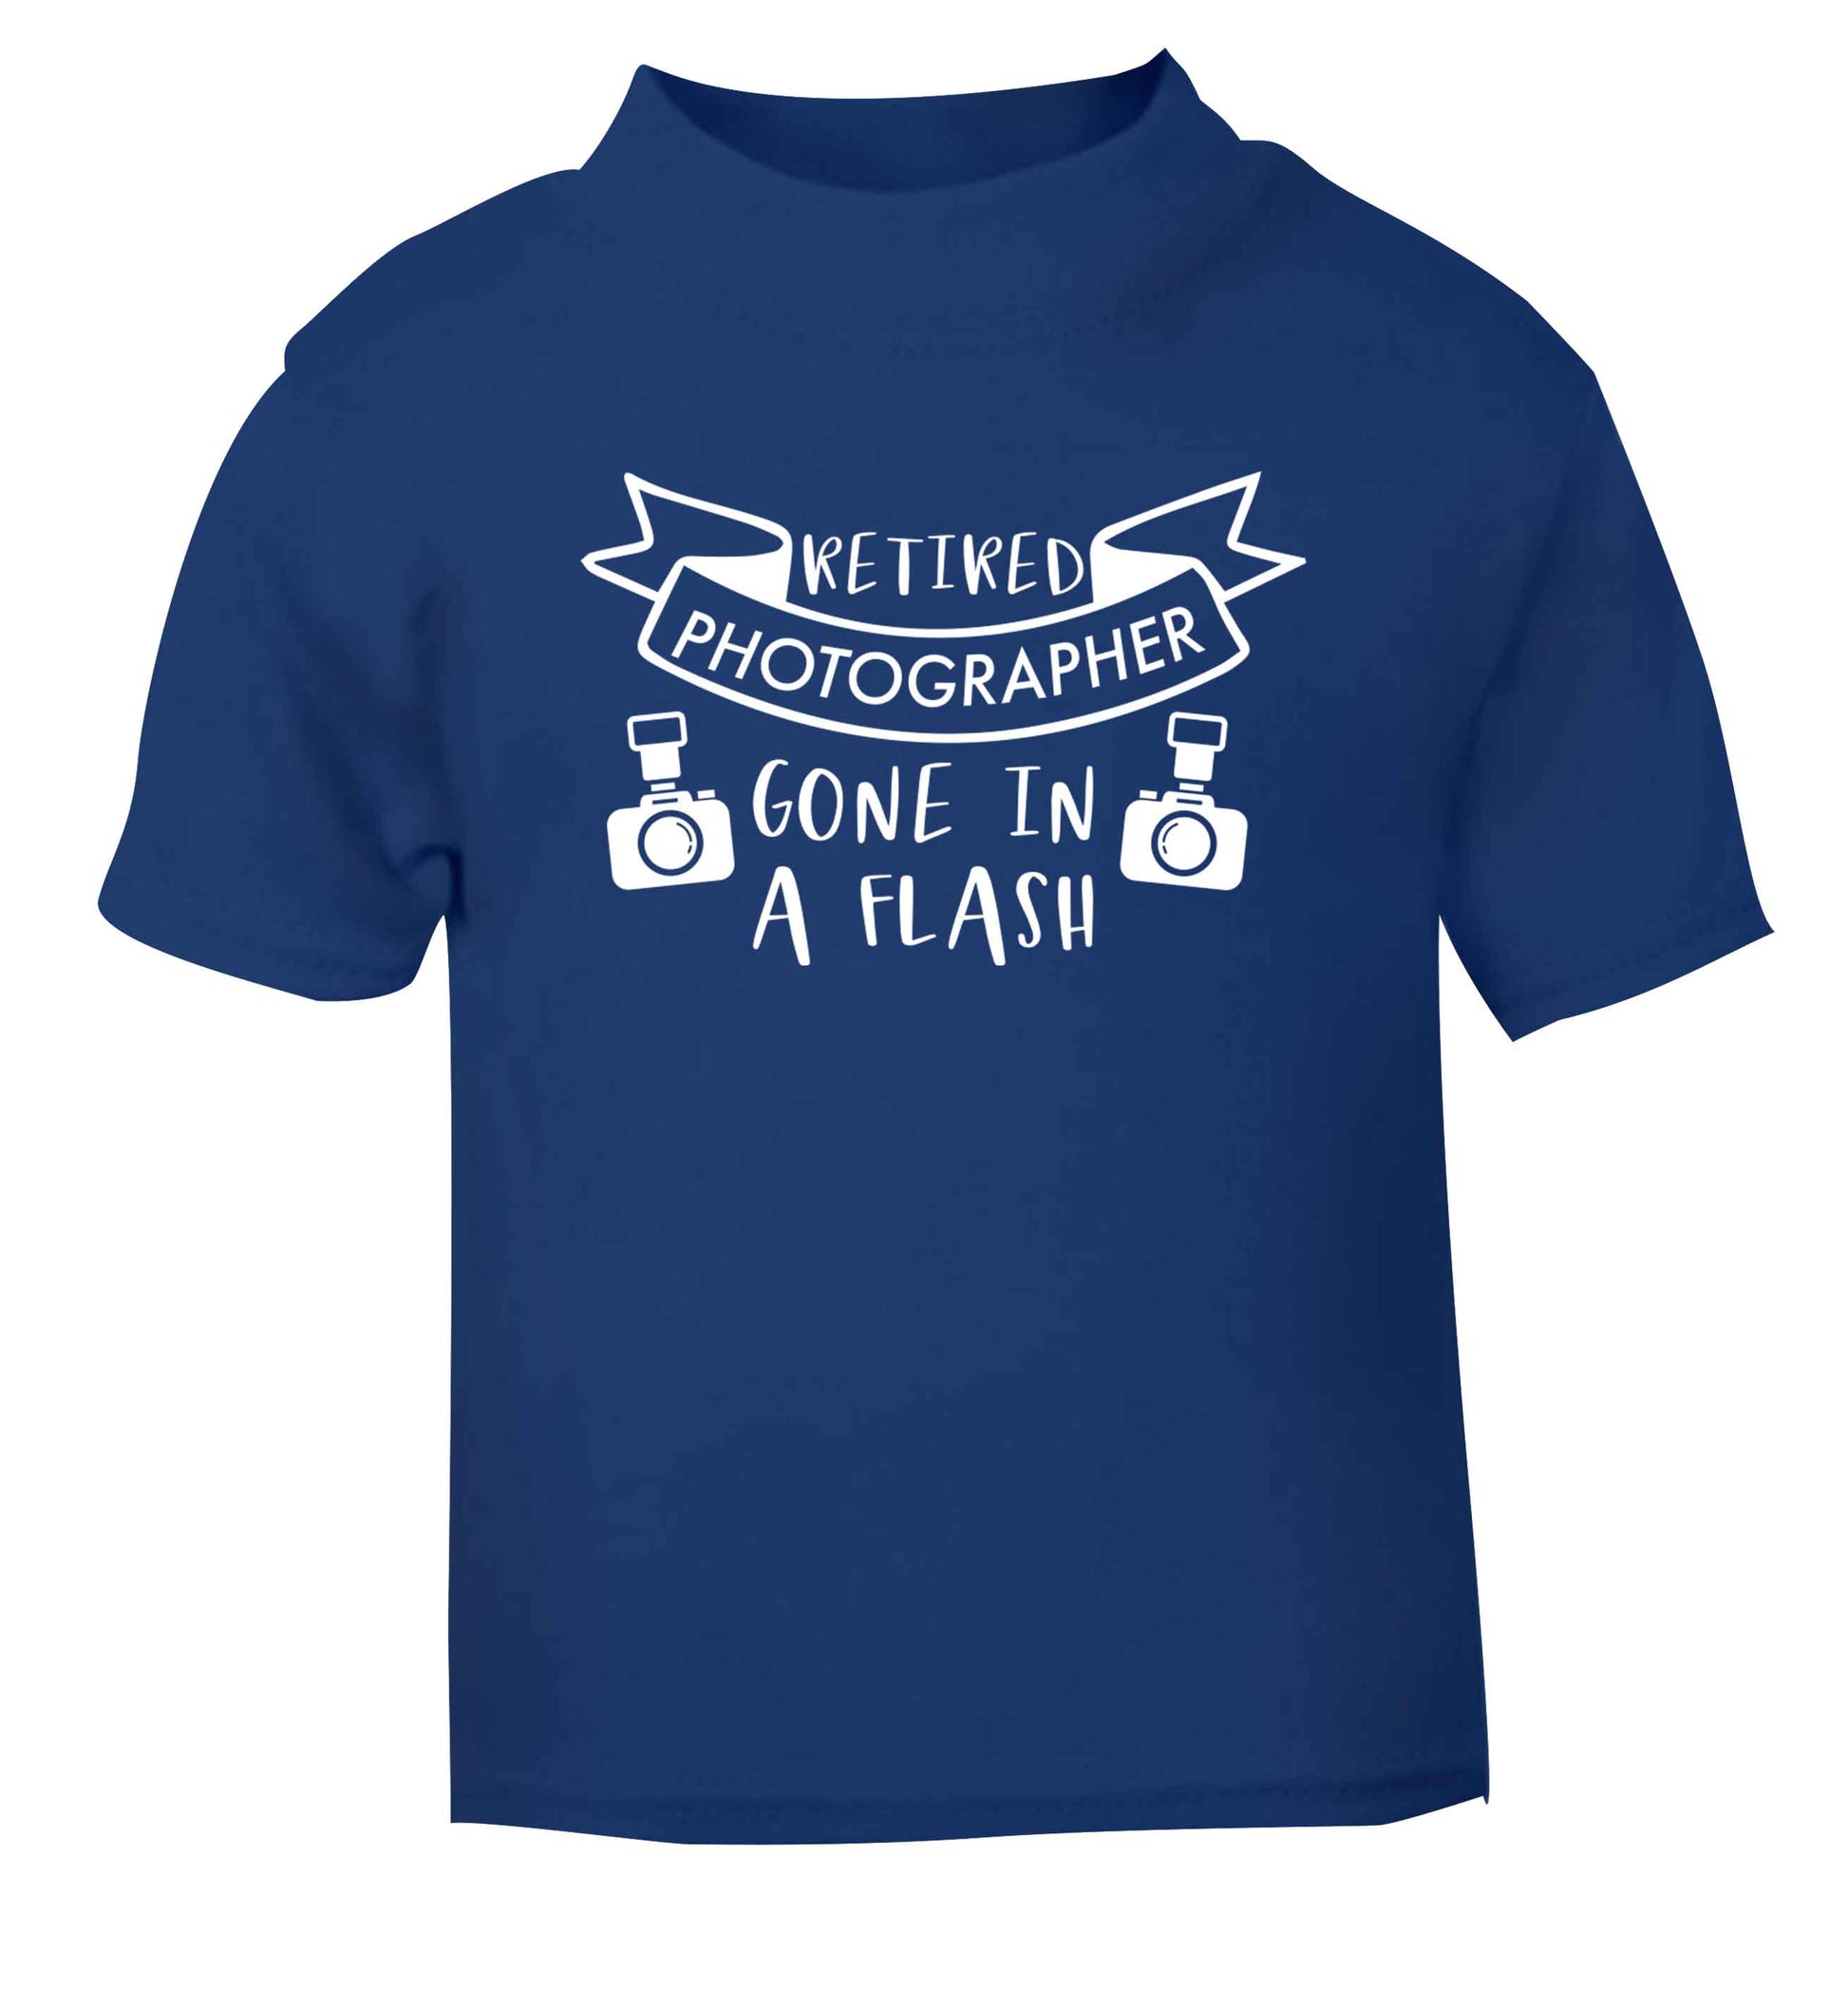 Retired photographer gone in a flash blue Baby Toddler Tshirt 2 Years